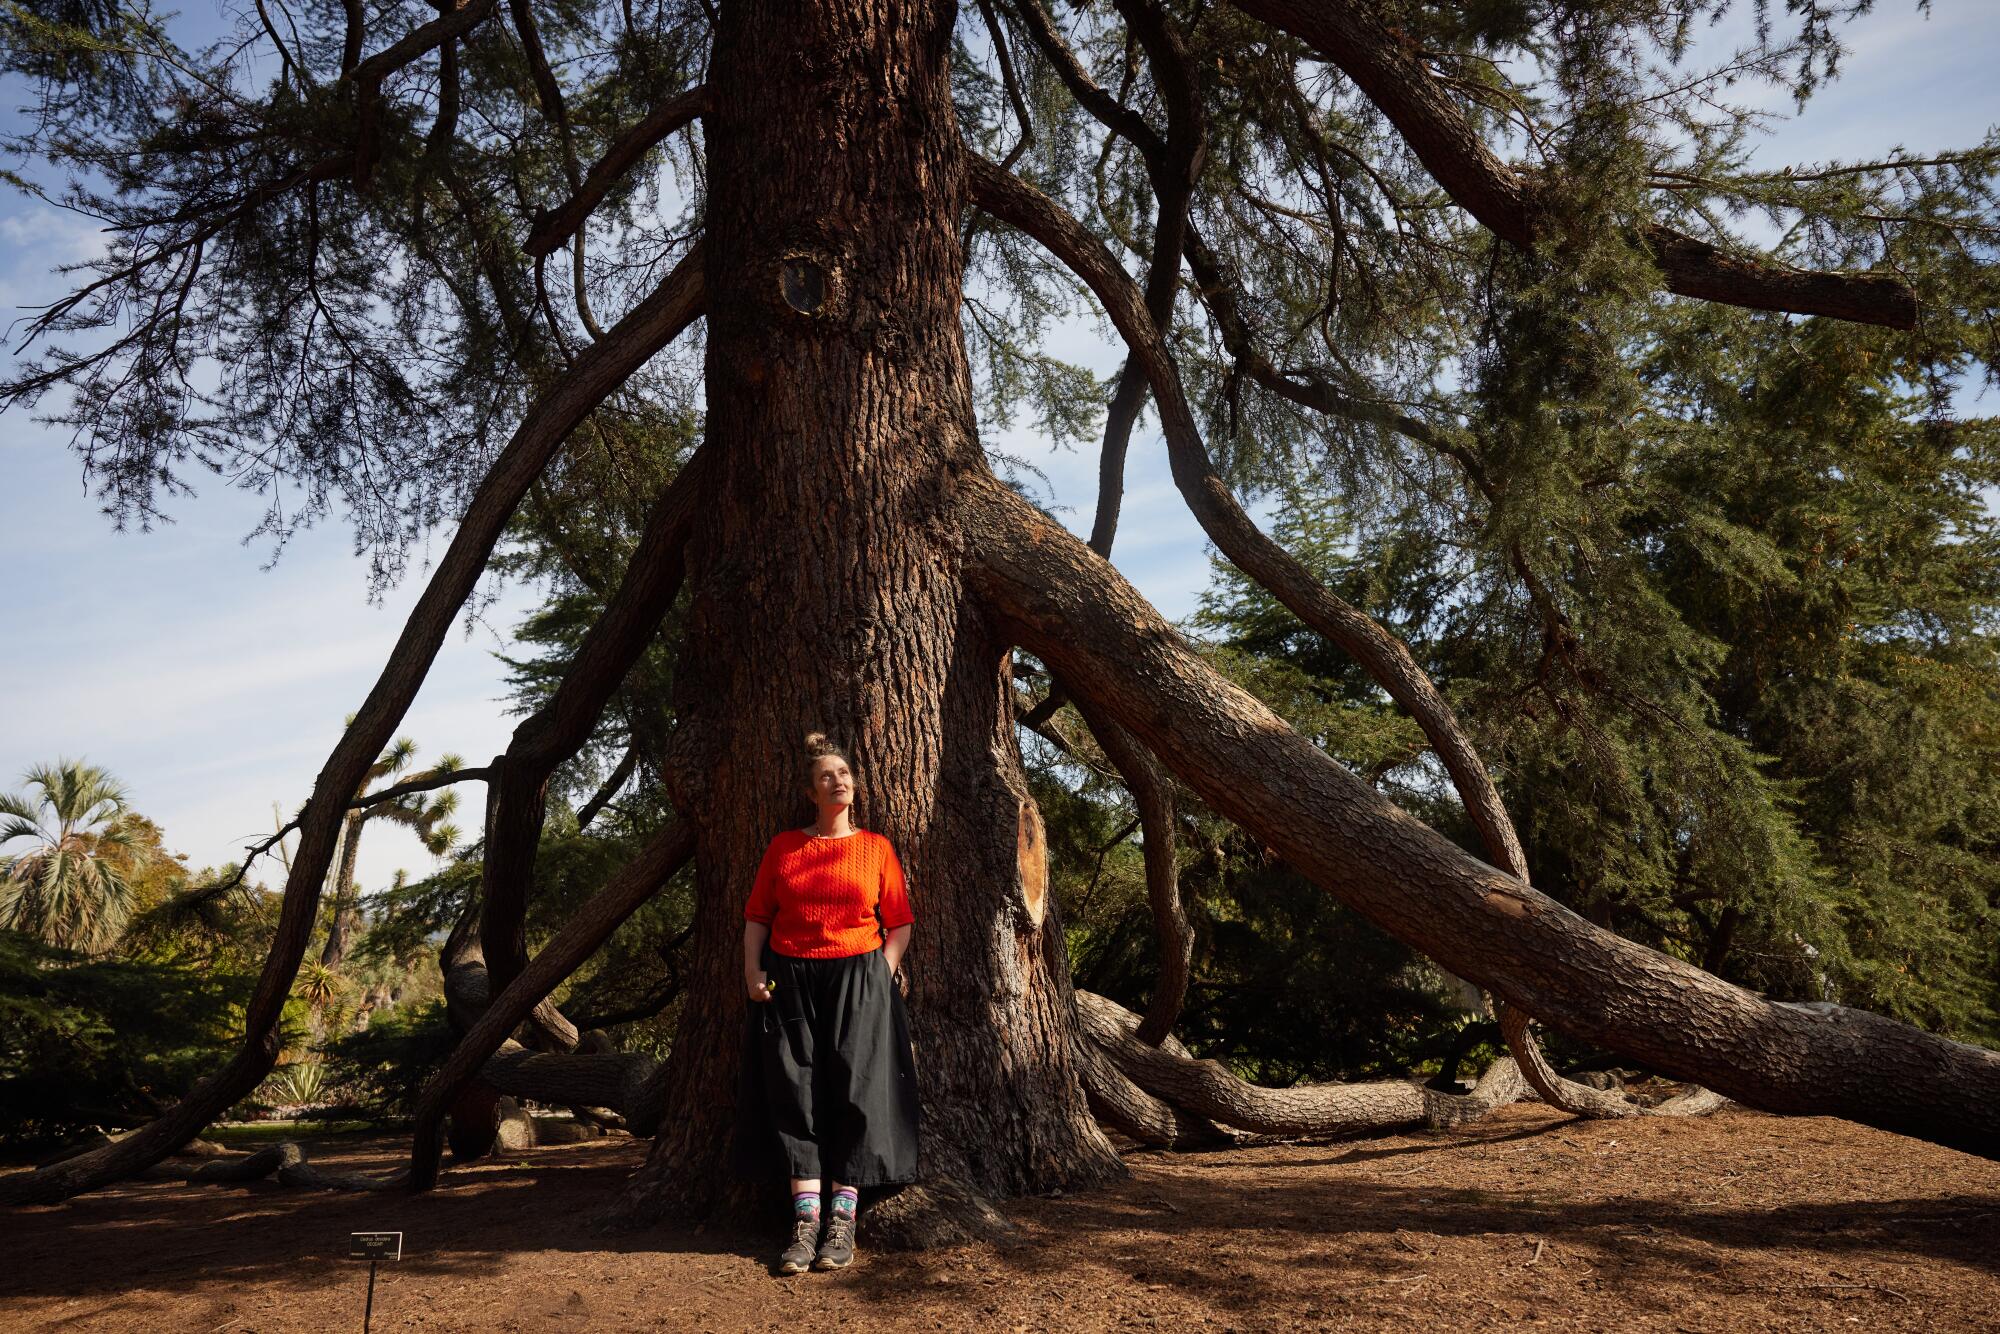 Debra Wilbur, in a red shirt, leans against a large tree while looking up.